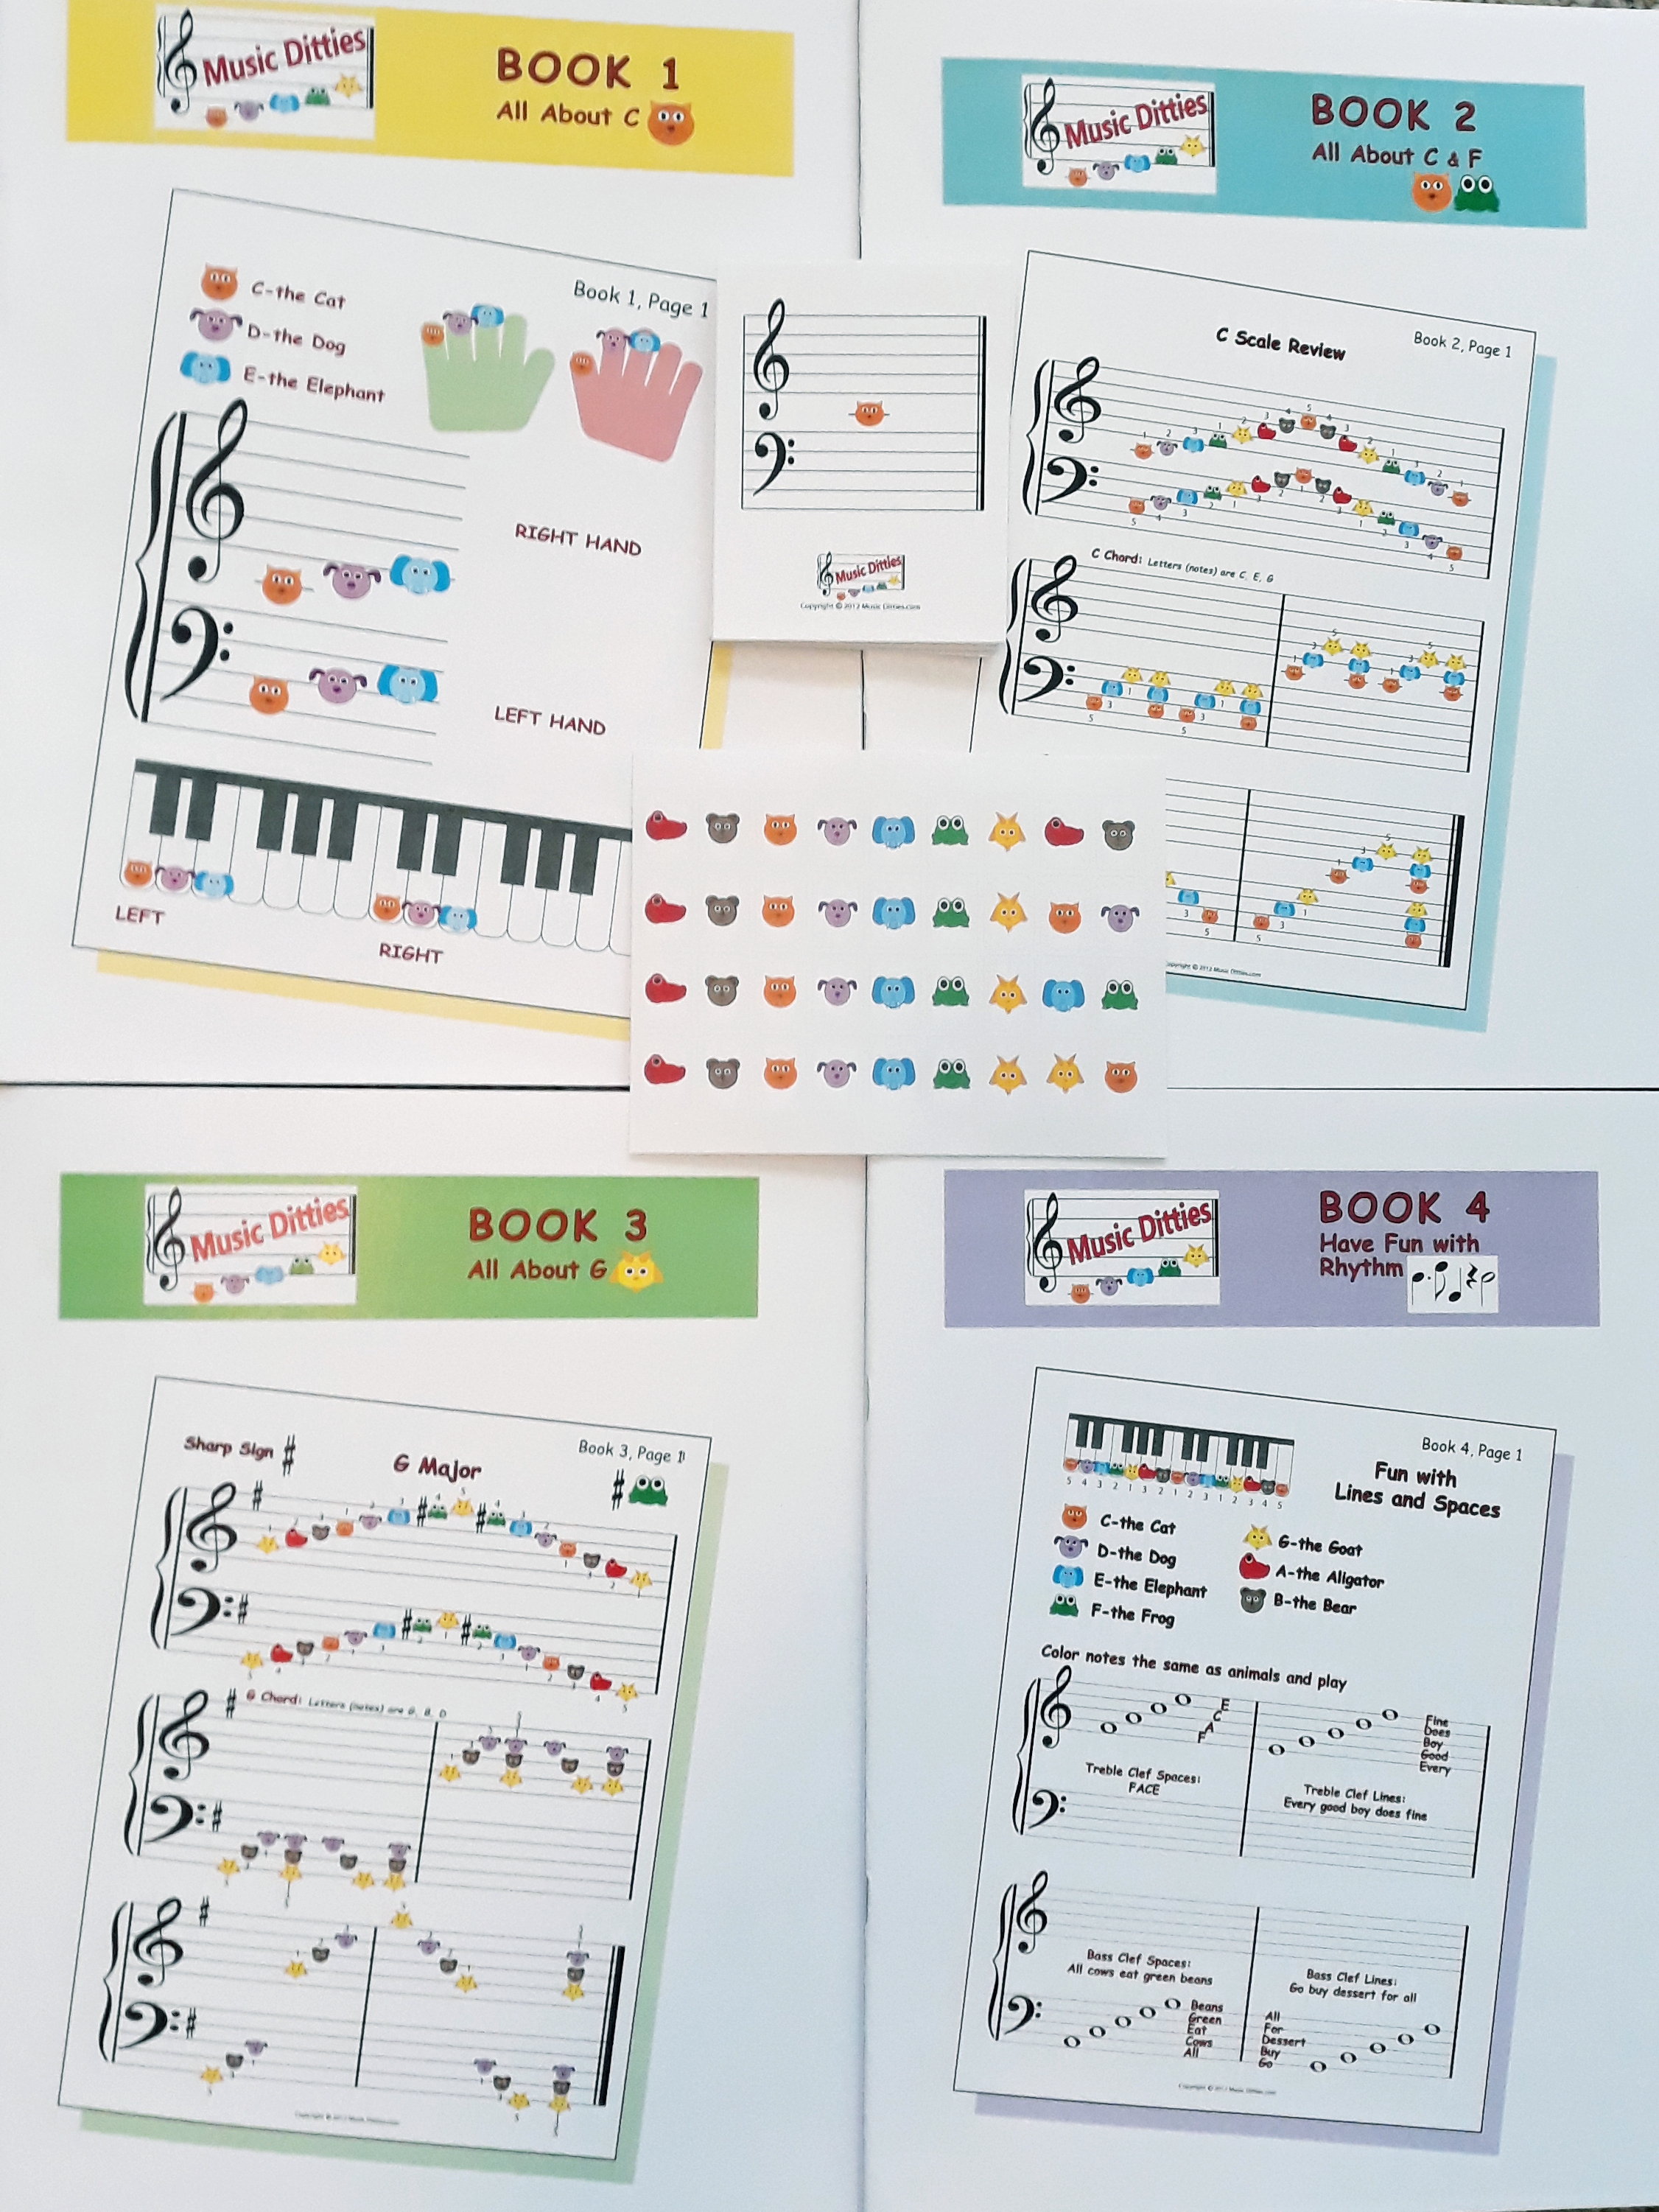 The set of 4 Books providing piano lessons for beginners